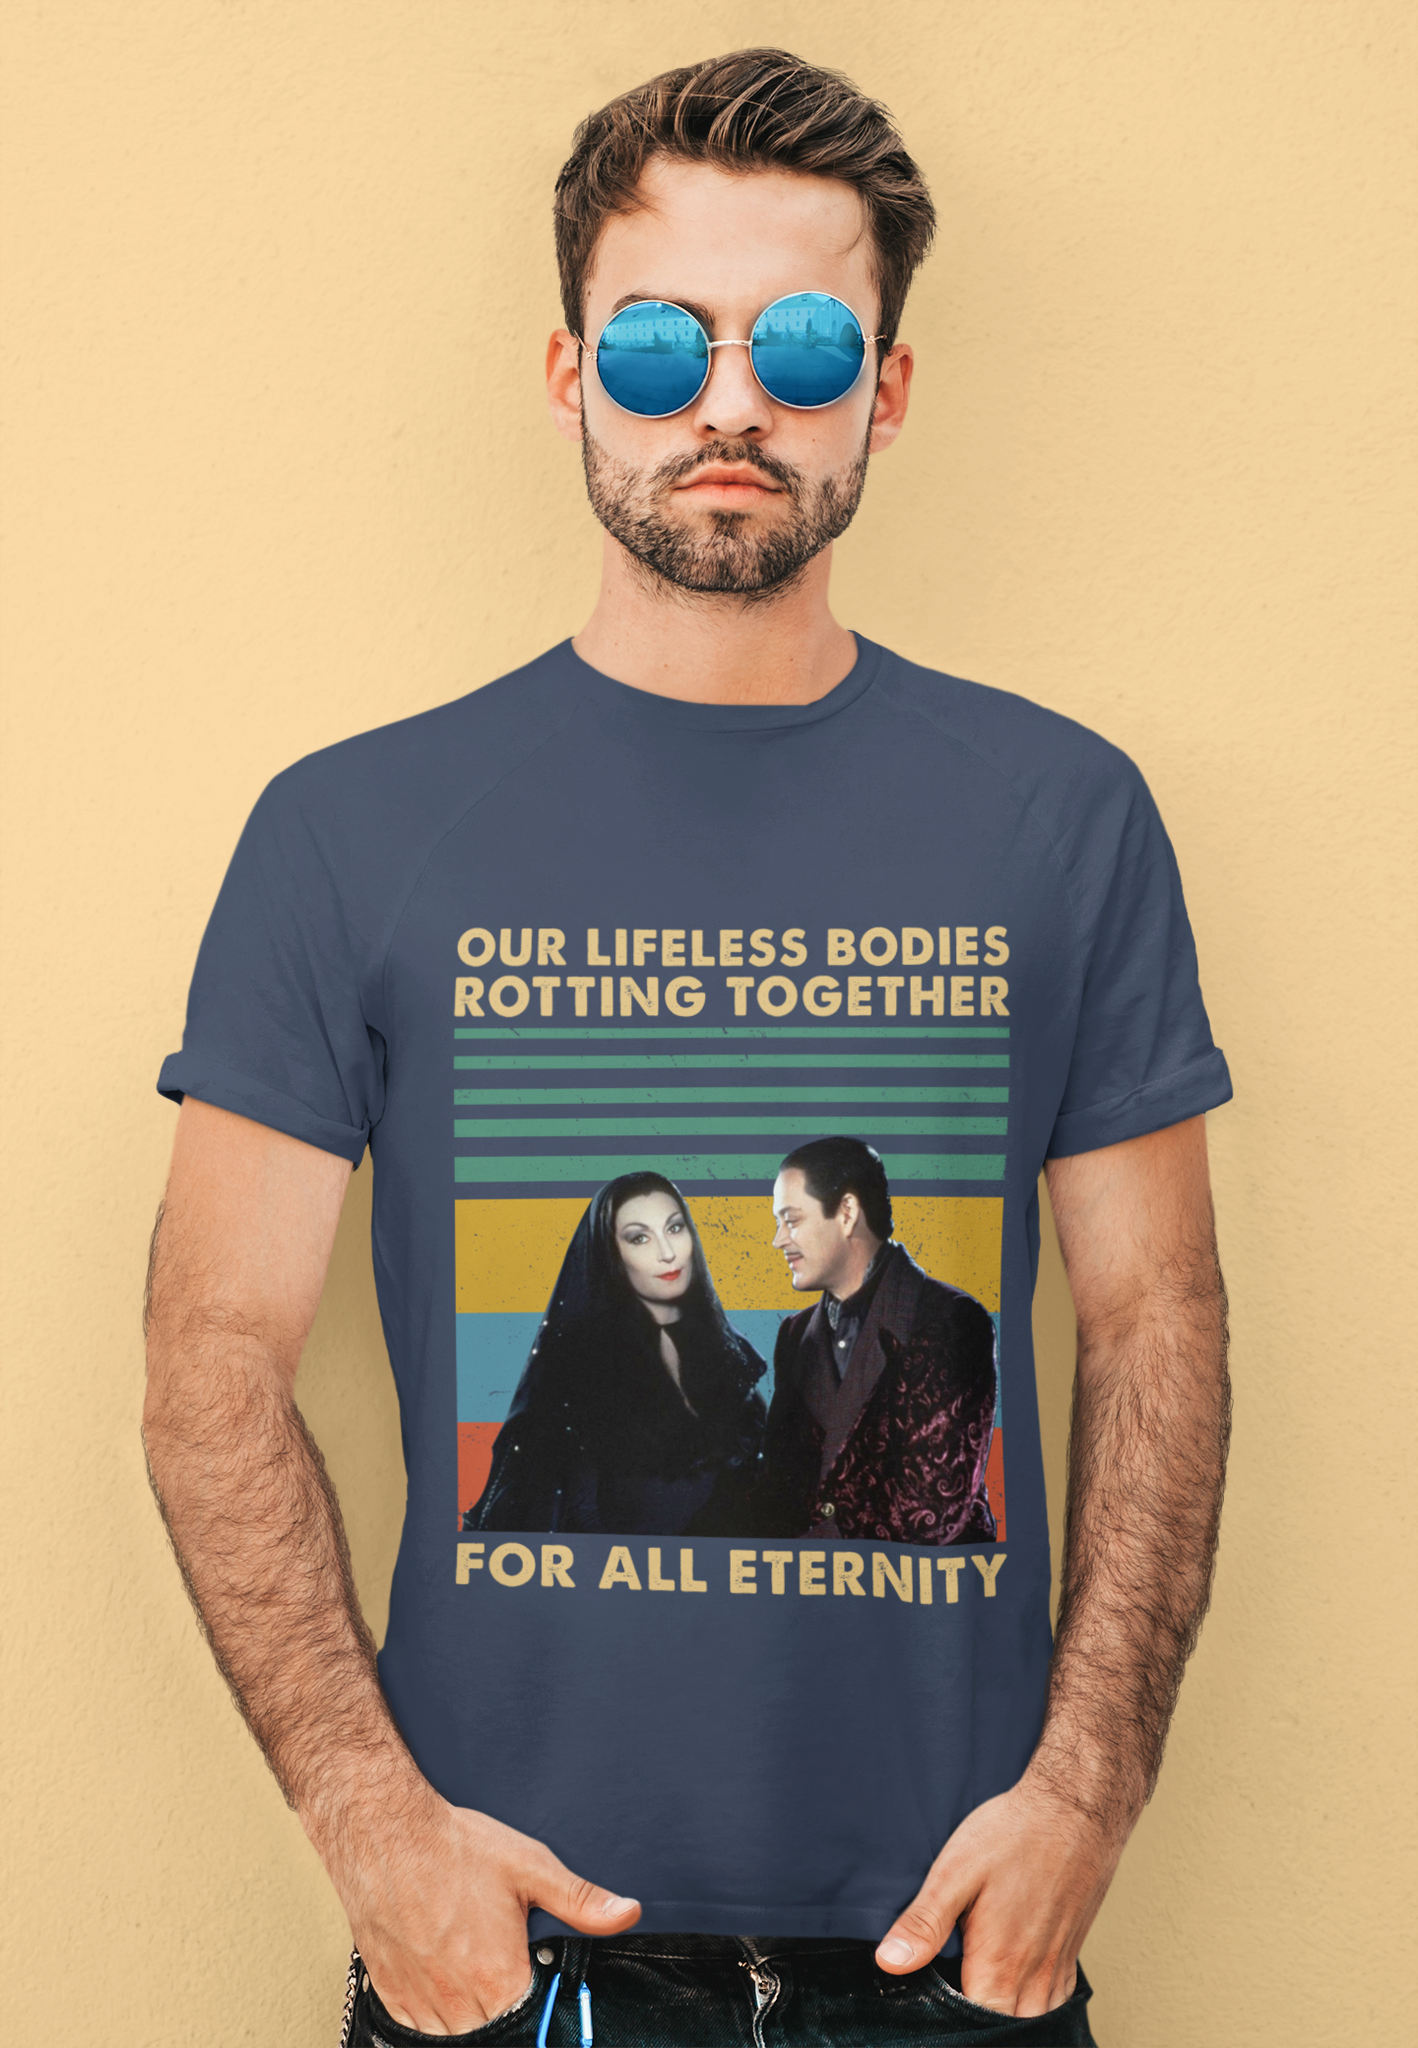 Addams Family T Shirt, Morticia And Gomez Addams T Shirt, Our Lifeless Bodies Rotting Together For All Eternity Tshirt